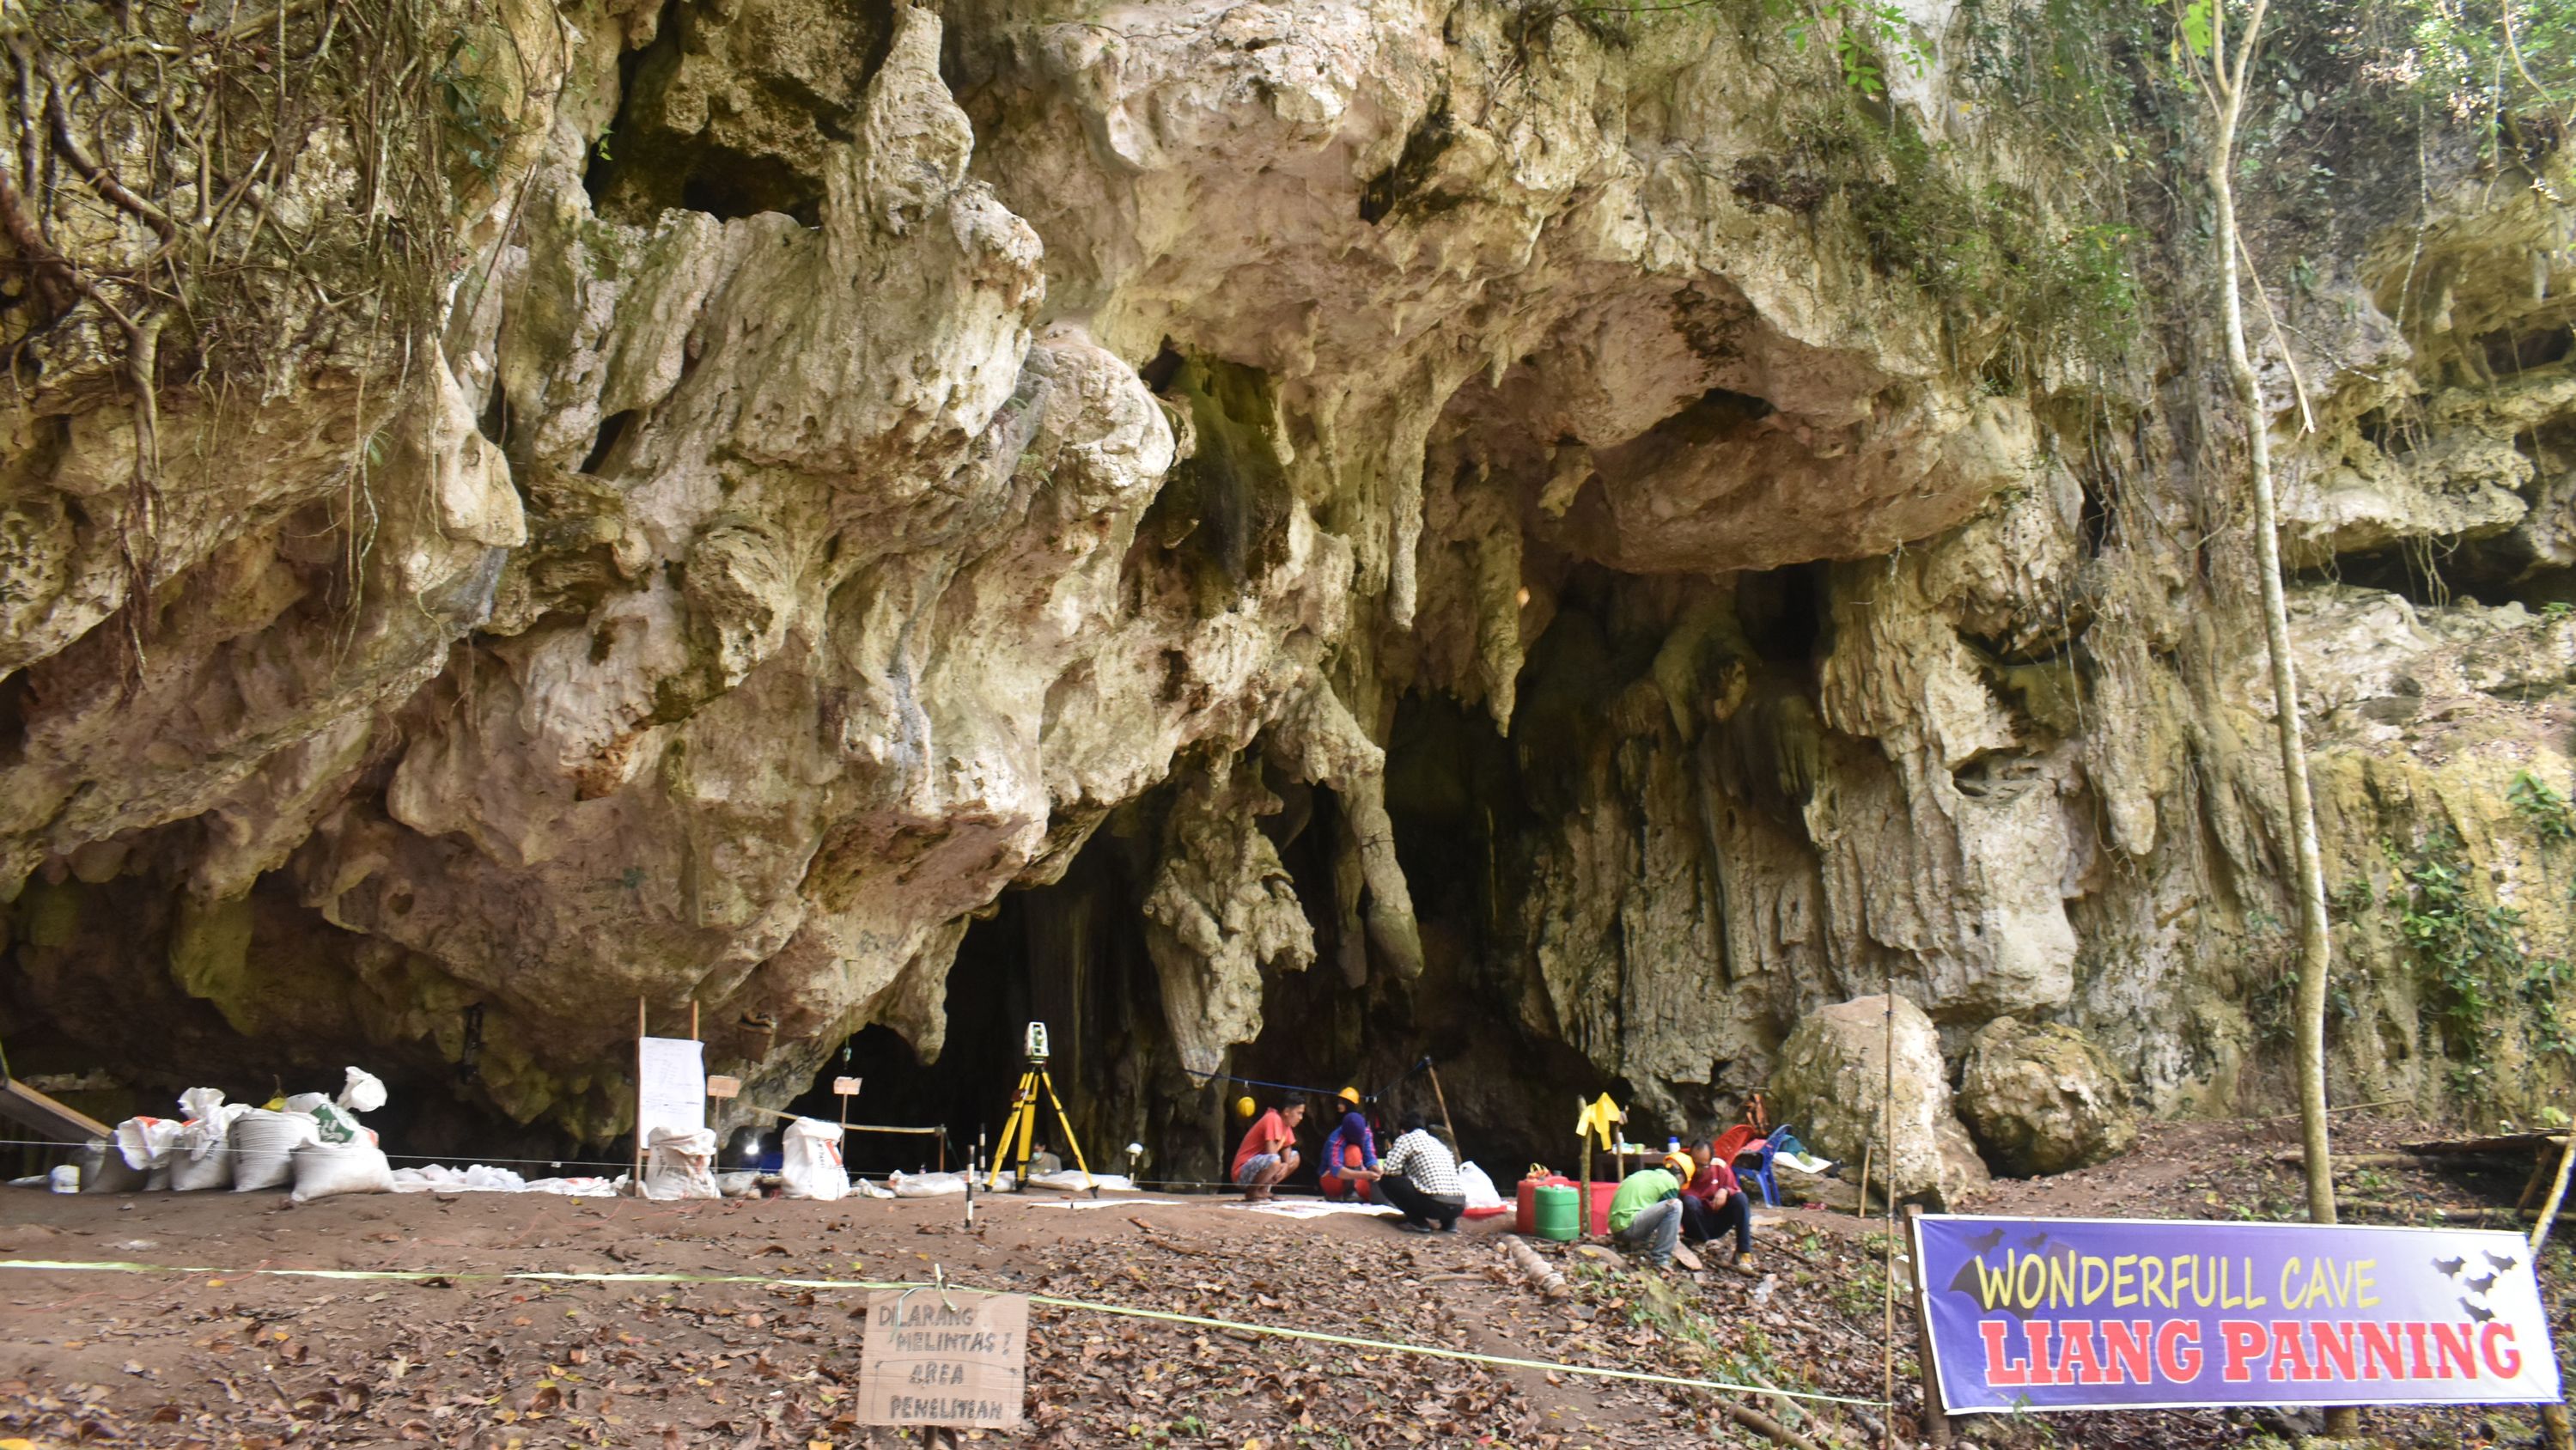 The Leang Panninge cave is where researchers uncovered the remains a young hunter-gatherer from 7,000 years ago.